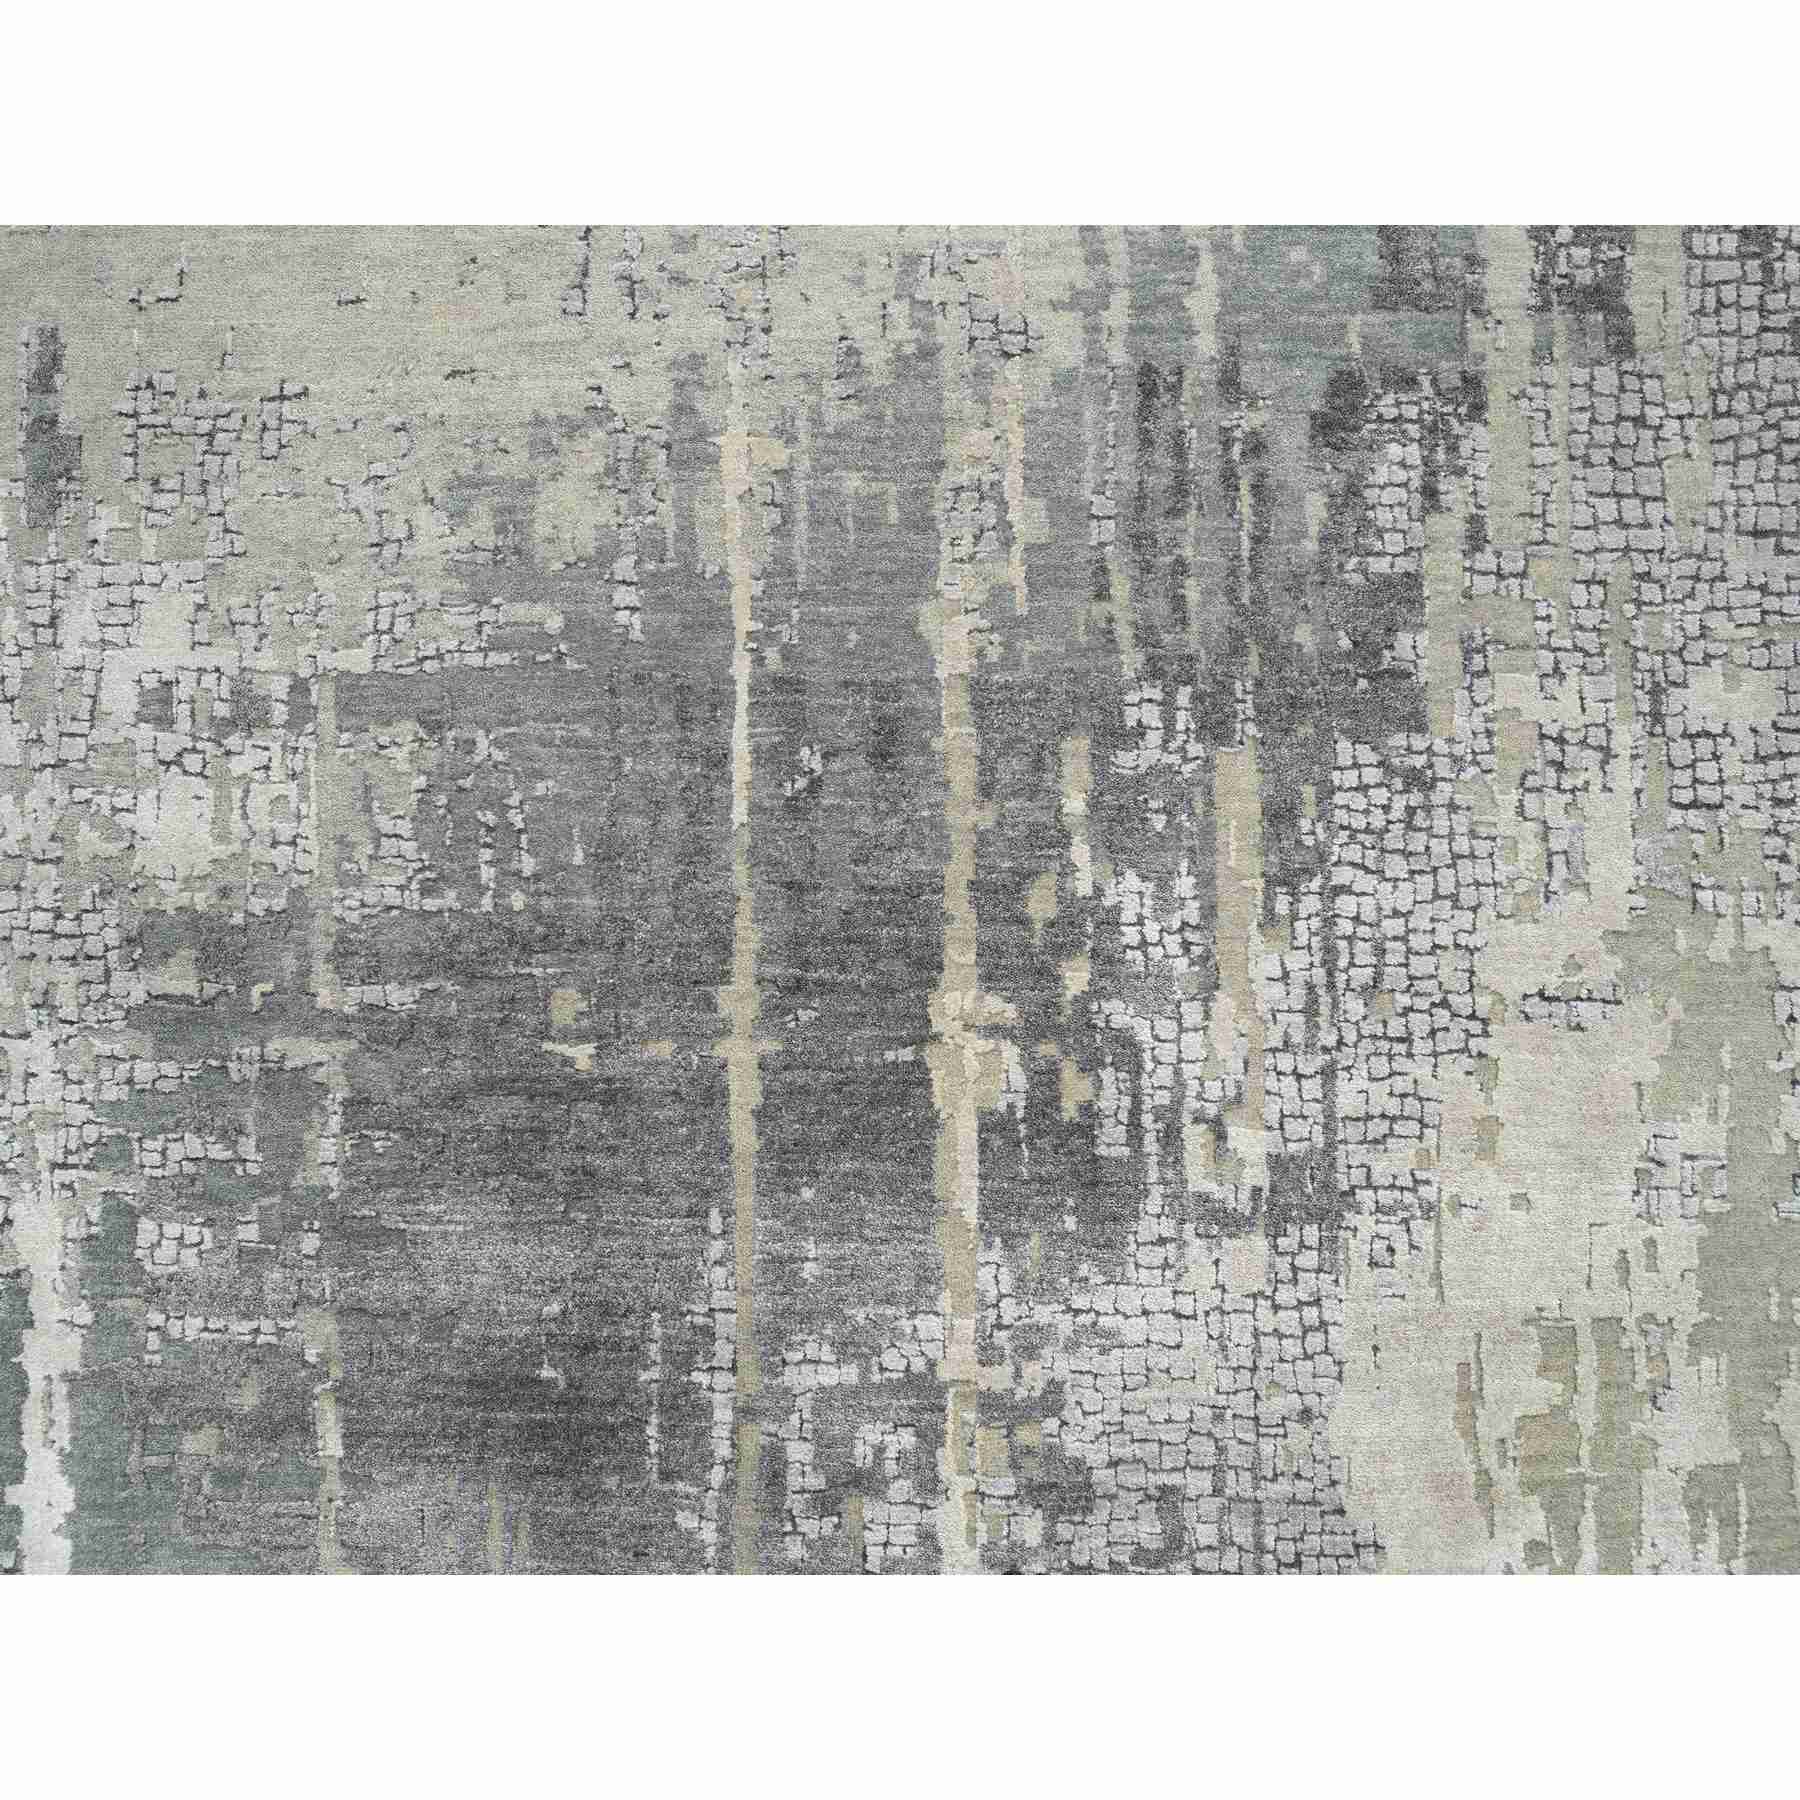 Modern-and-Contemporary-Hand-Knotted-Rug-321685